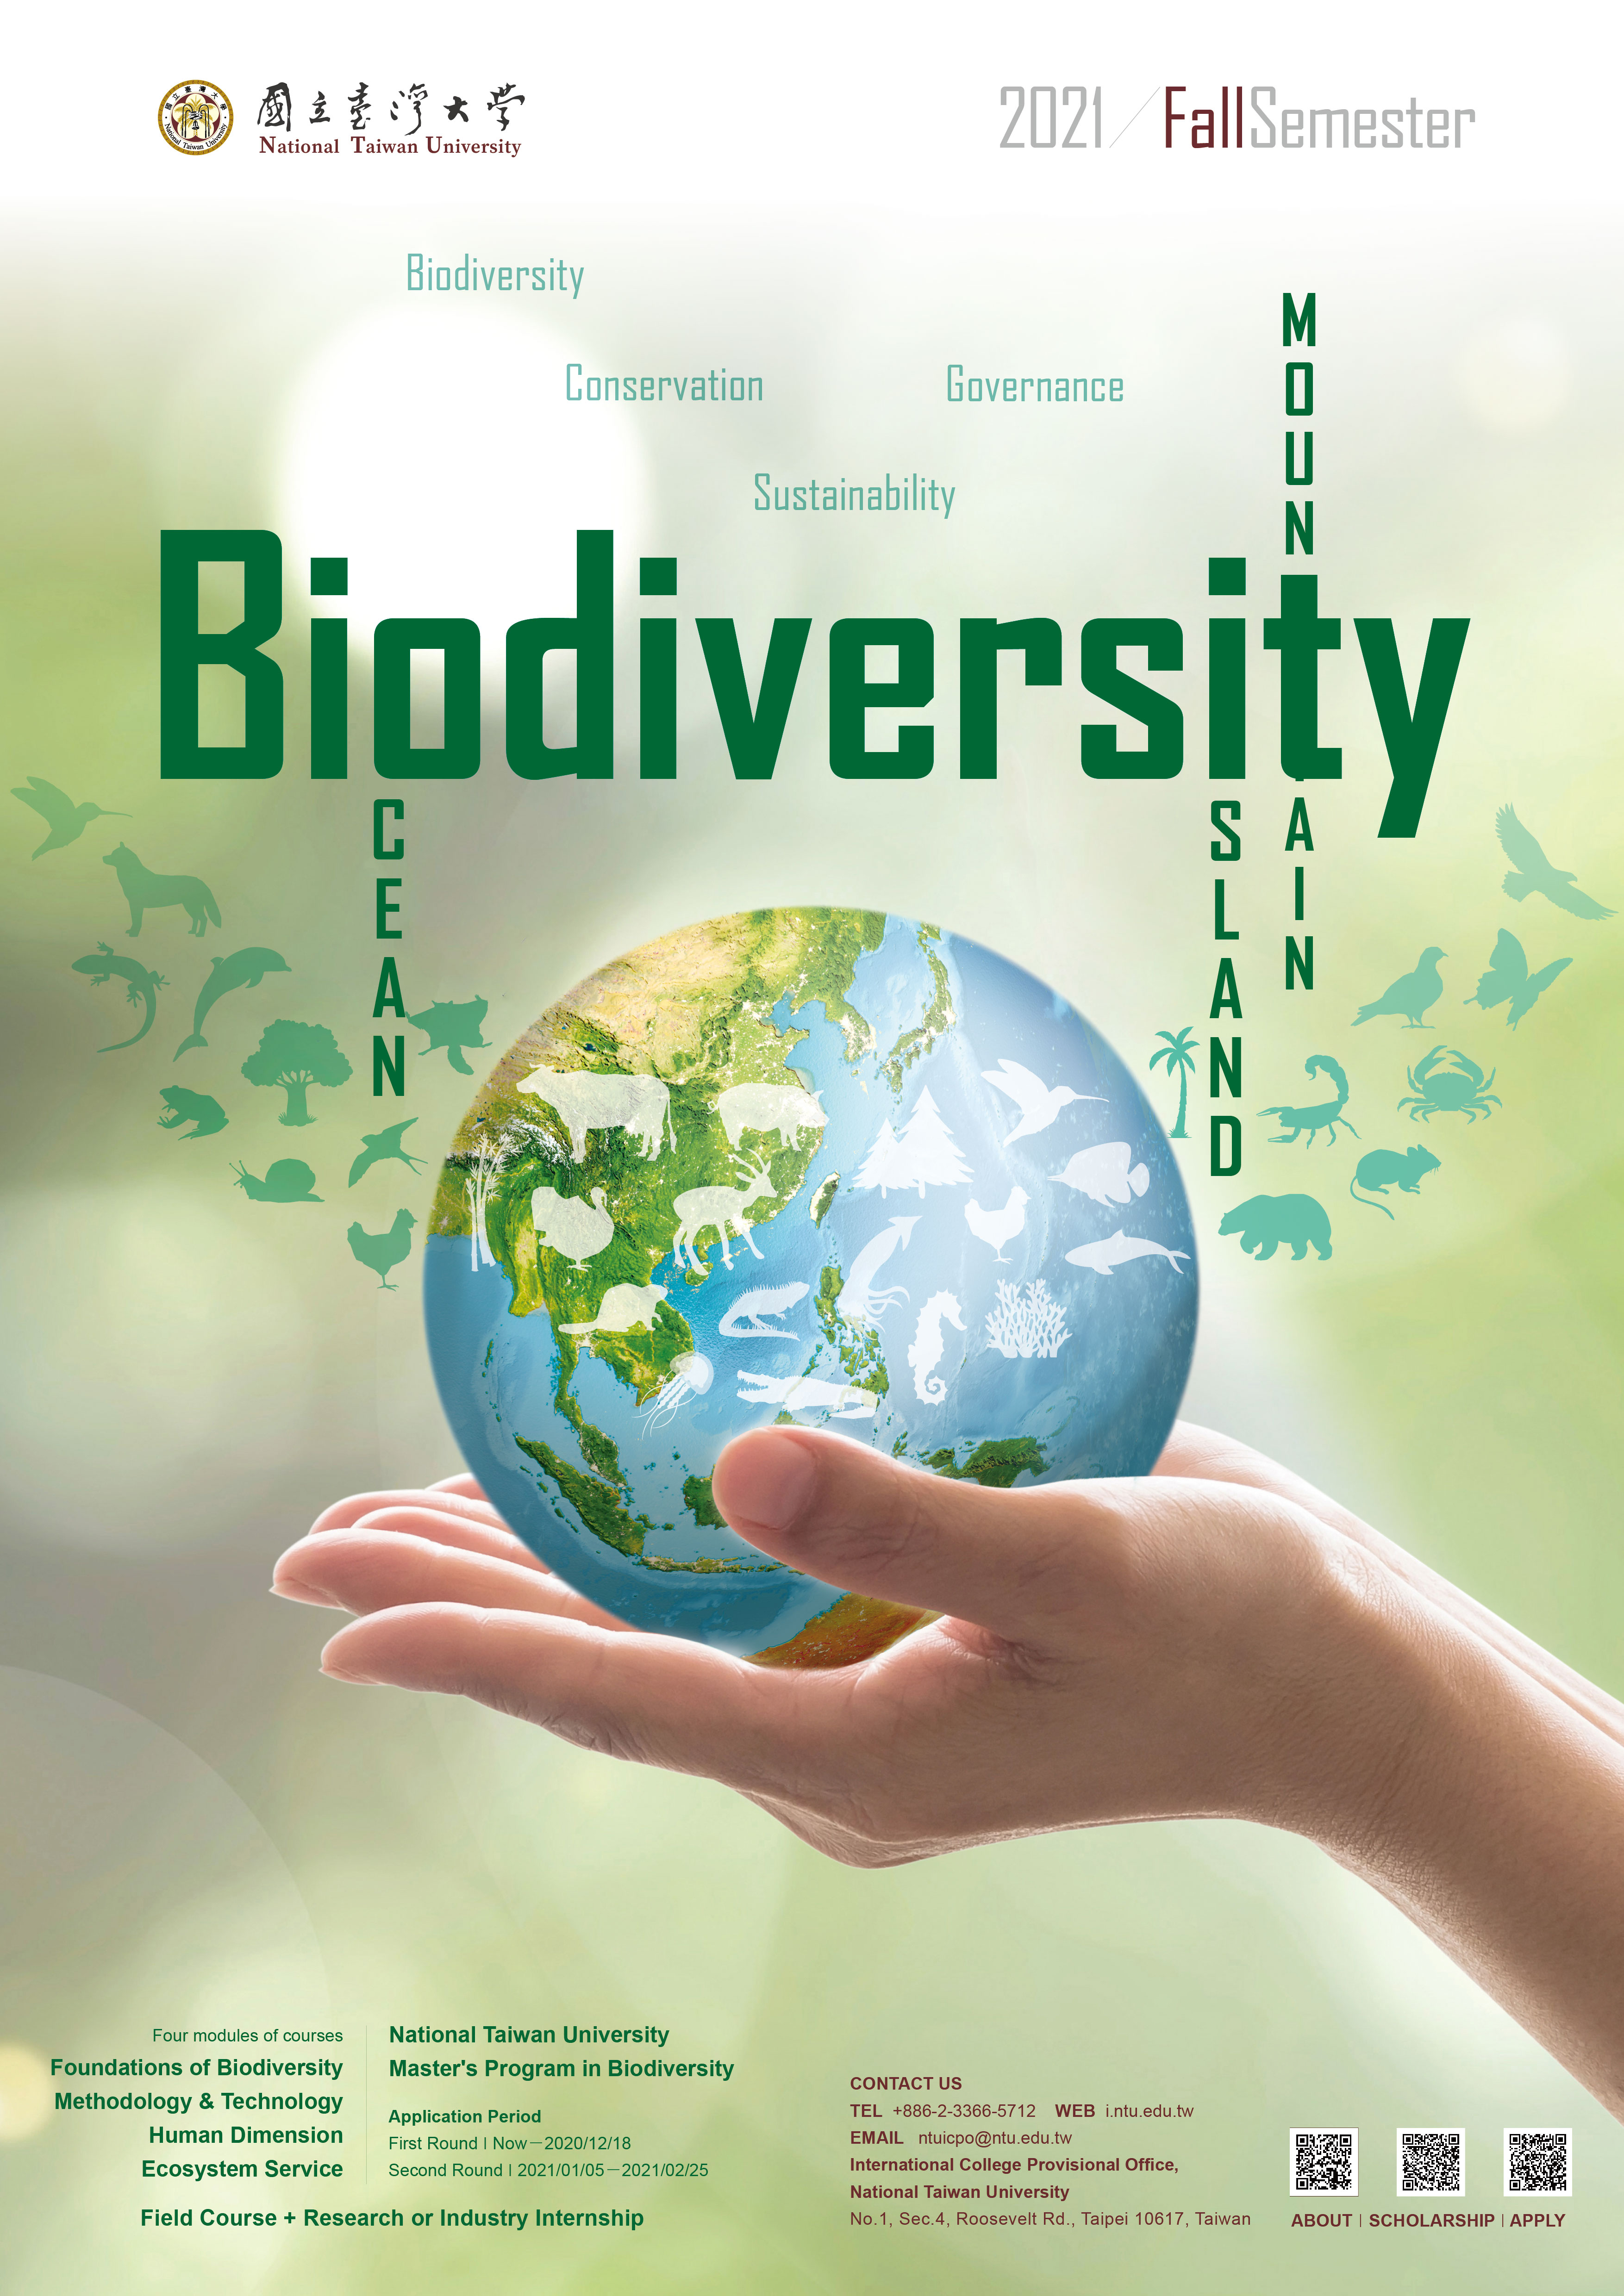 Master's Program in Biodiversity sign up NOW for the class 2021